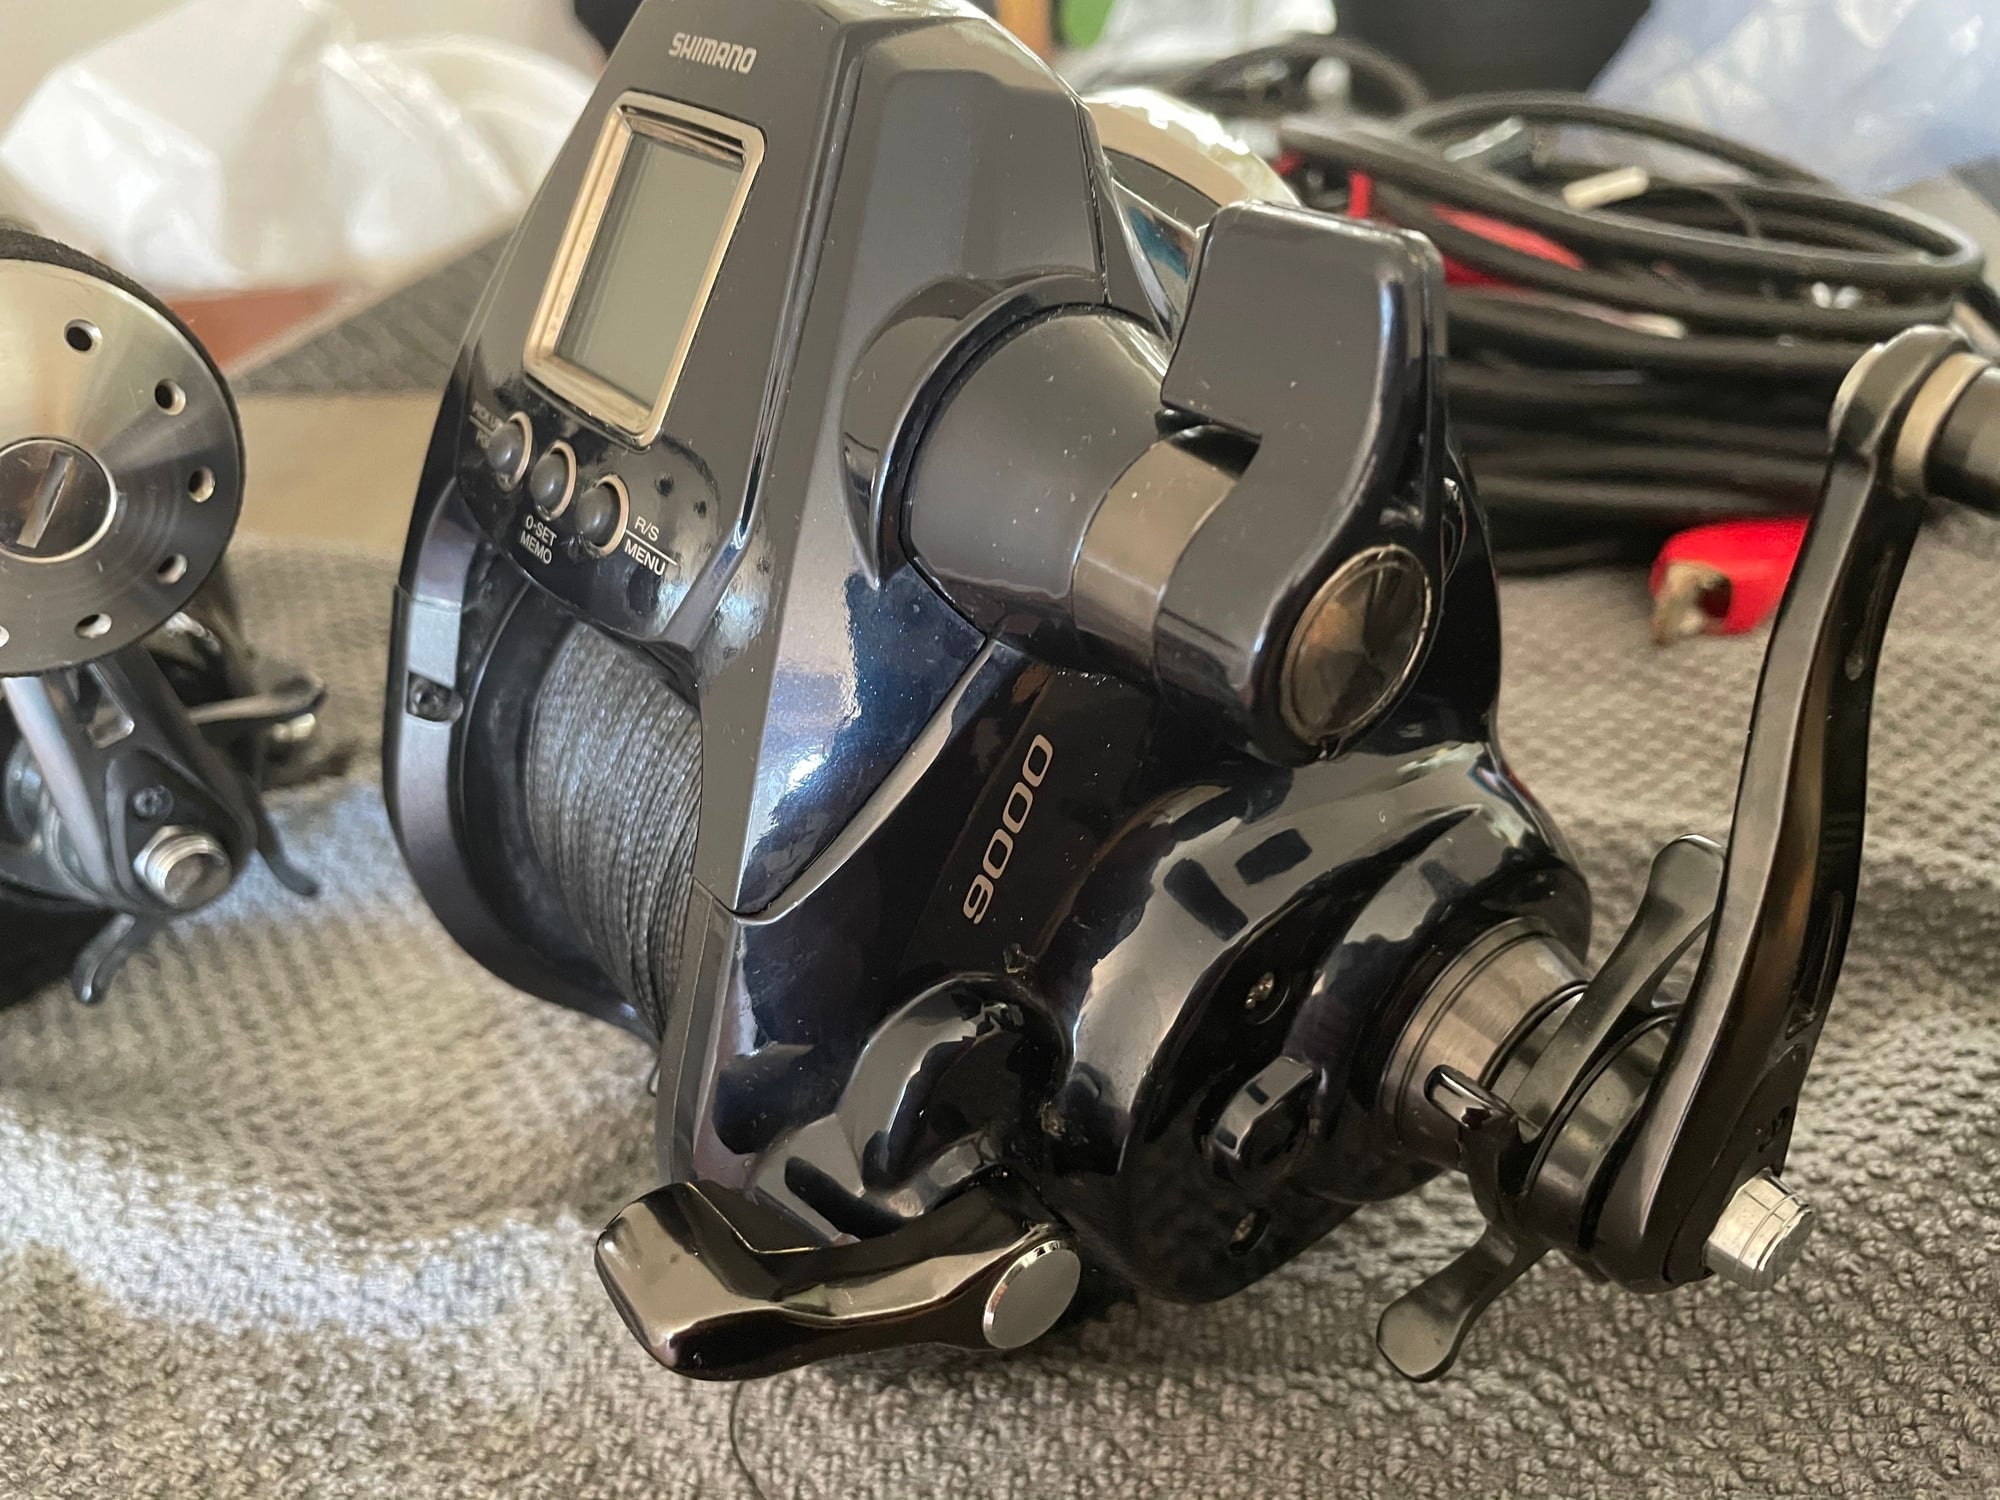 All sold 2 Shimano Forcemaster 9000, 1 Banax Kaigen 1000 electric